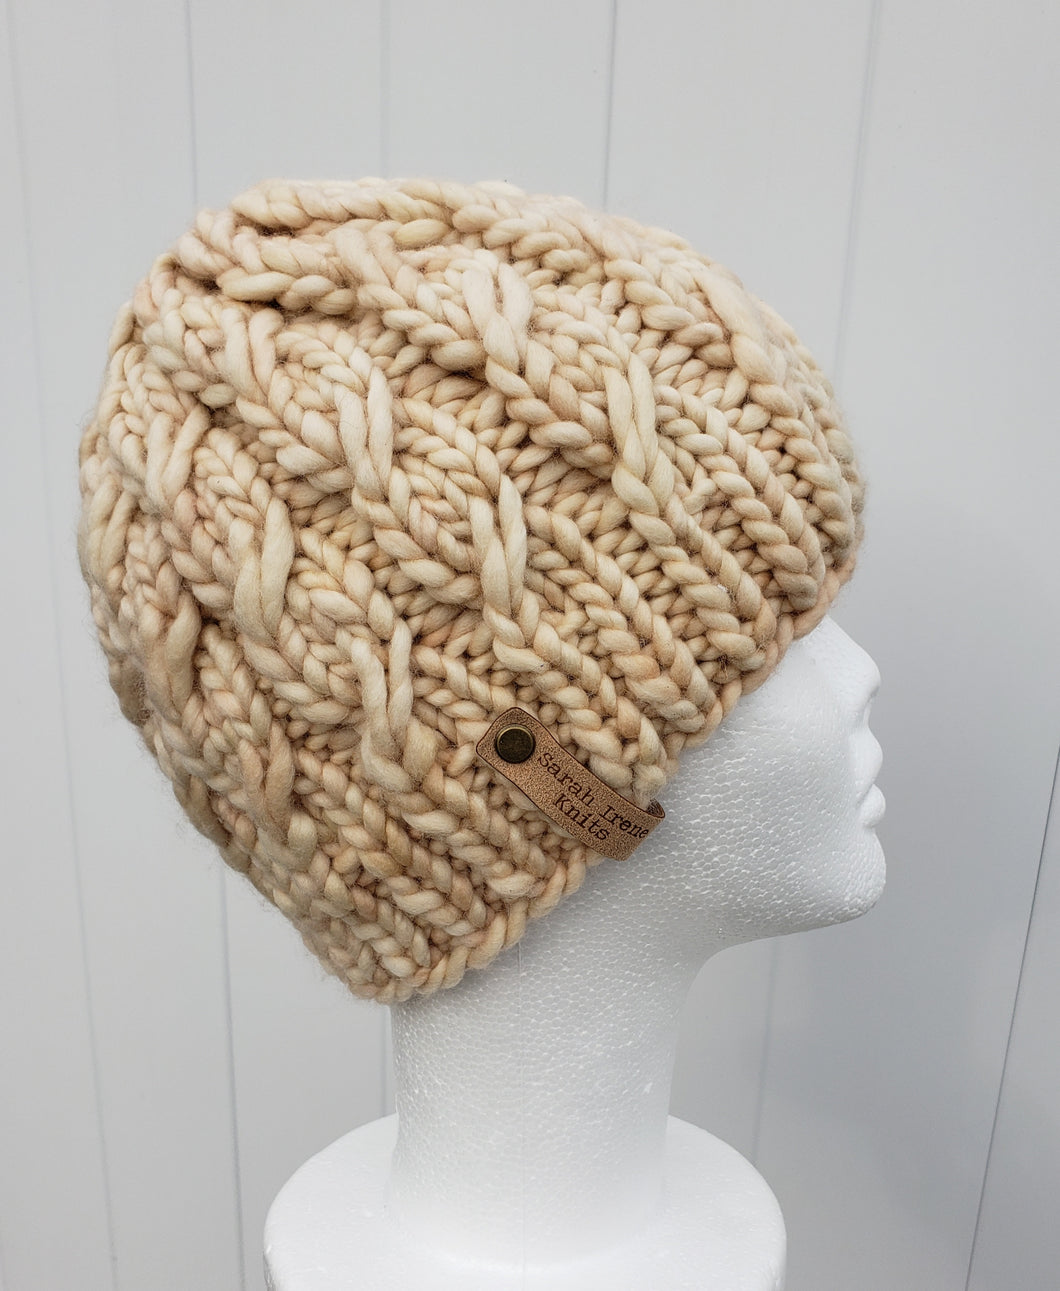 Cable effect beanie in beige cream color. No pom.